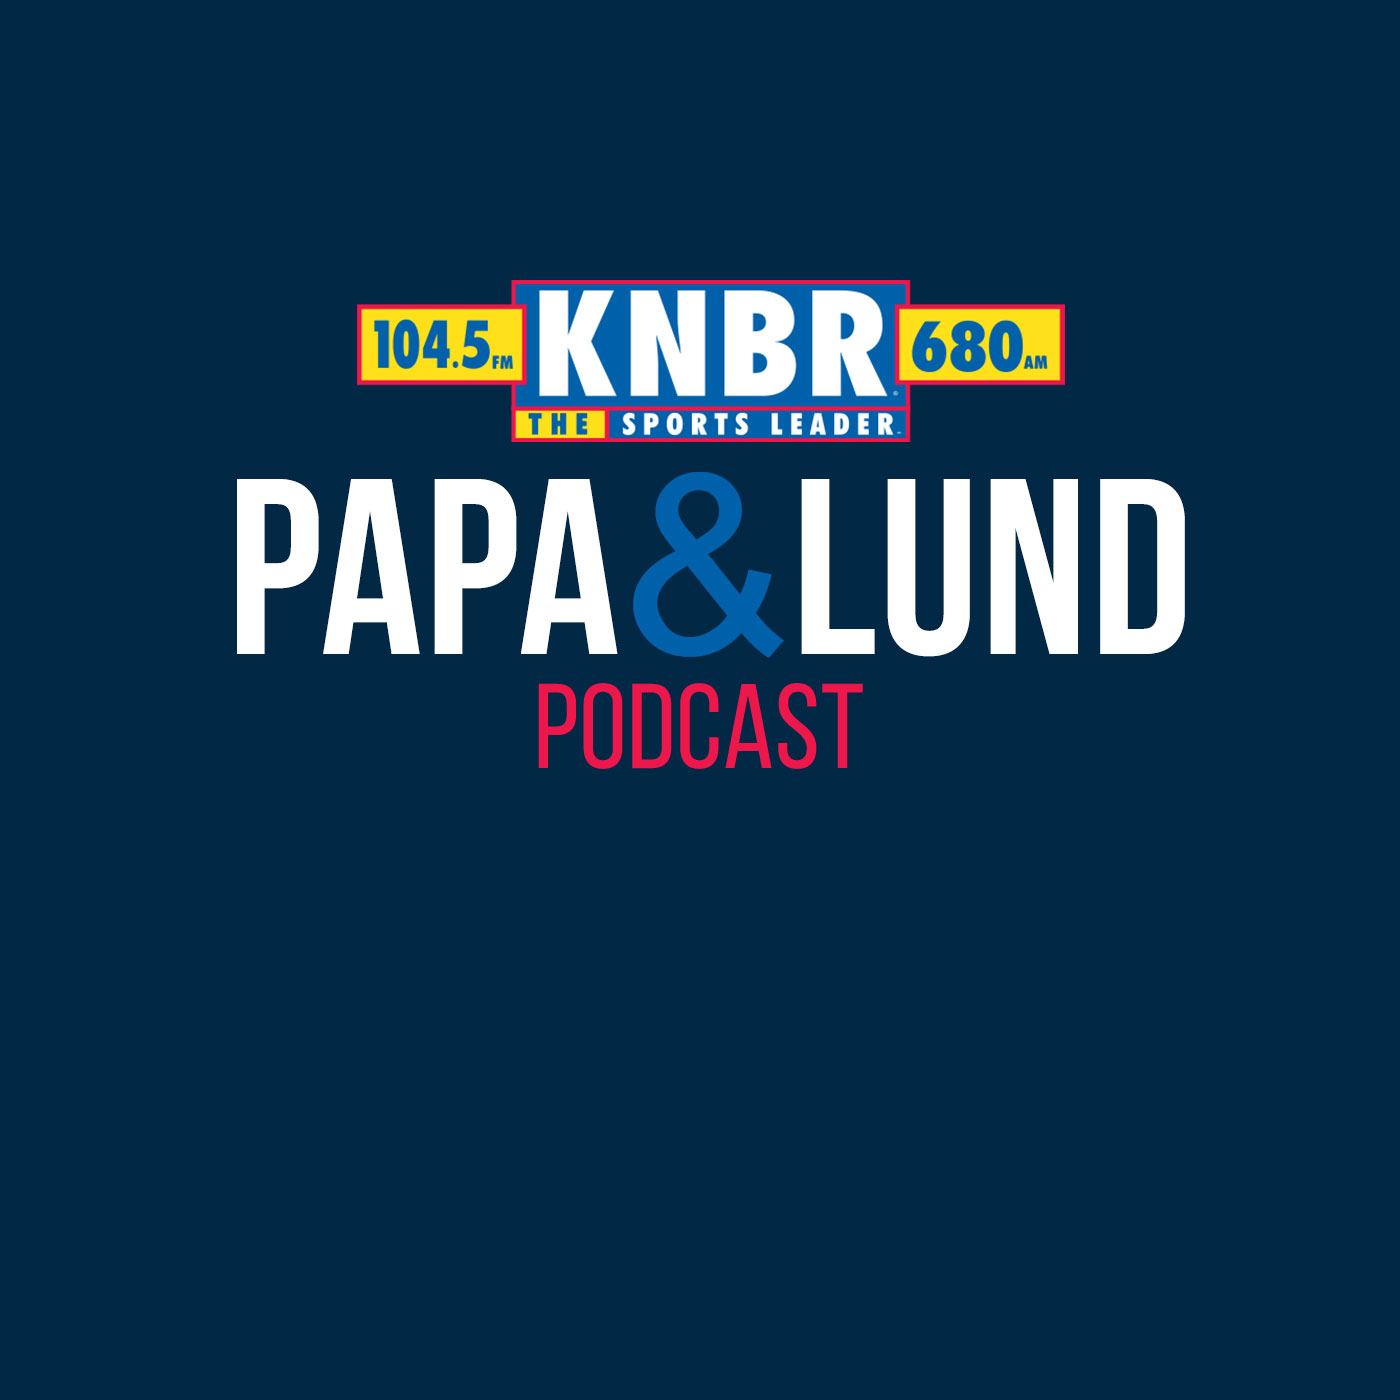 1-30 Mike Sando joins Papa & Lund to break down the future options of the 49ers at QB following Brock Purdy's injury, Trey Lance's return from Injury and some potential Free Agents who may look to join the 49ers this offseason